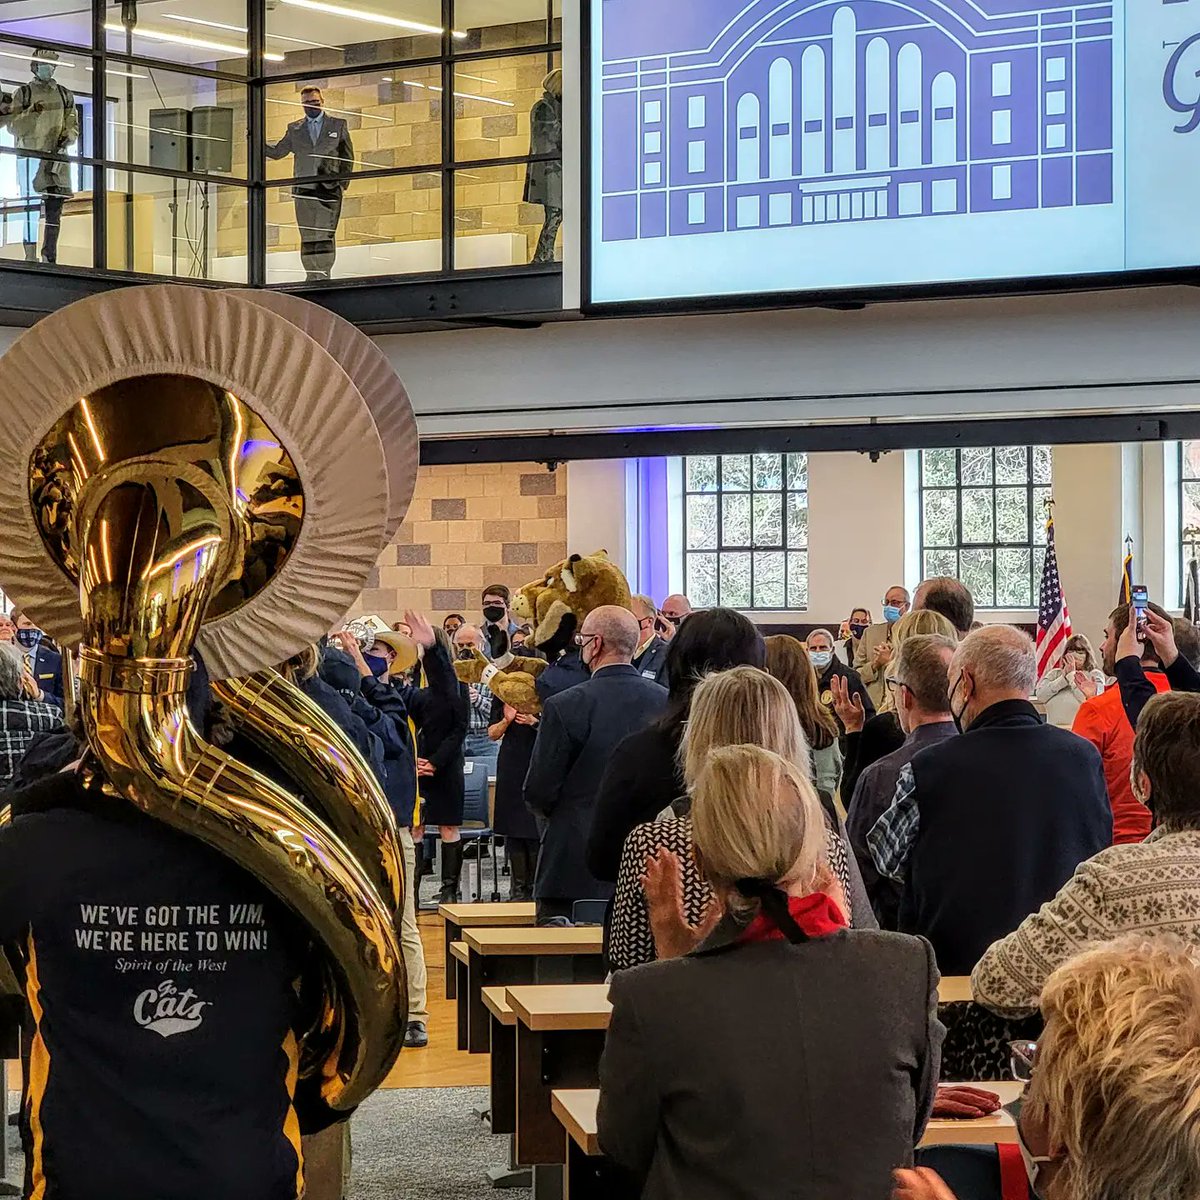 Congratulations to President Cruzado and Montana State University for the opening of the newly renovated Romney Hall. Here's to the next 100 years!

#MSU #Bobcats #Romney #LandGrantUniversity #LandBoard #Education